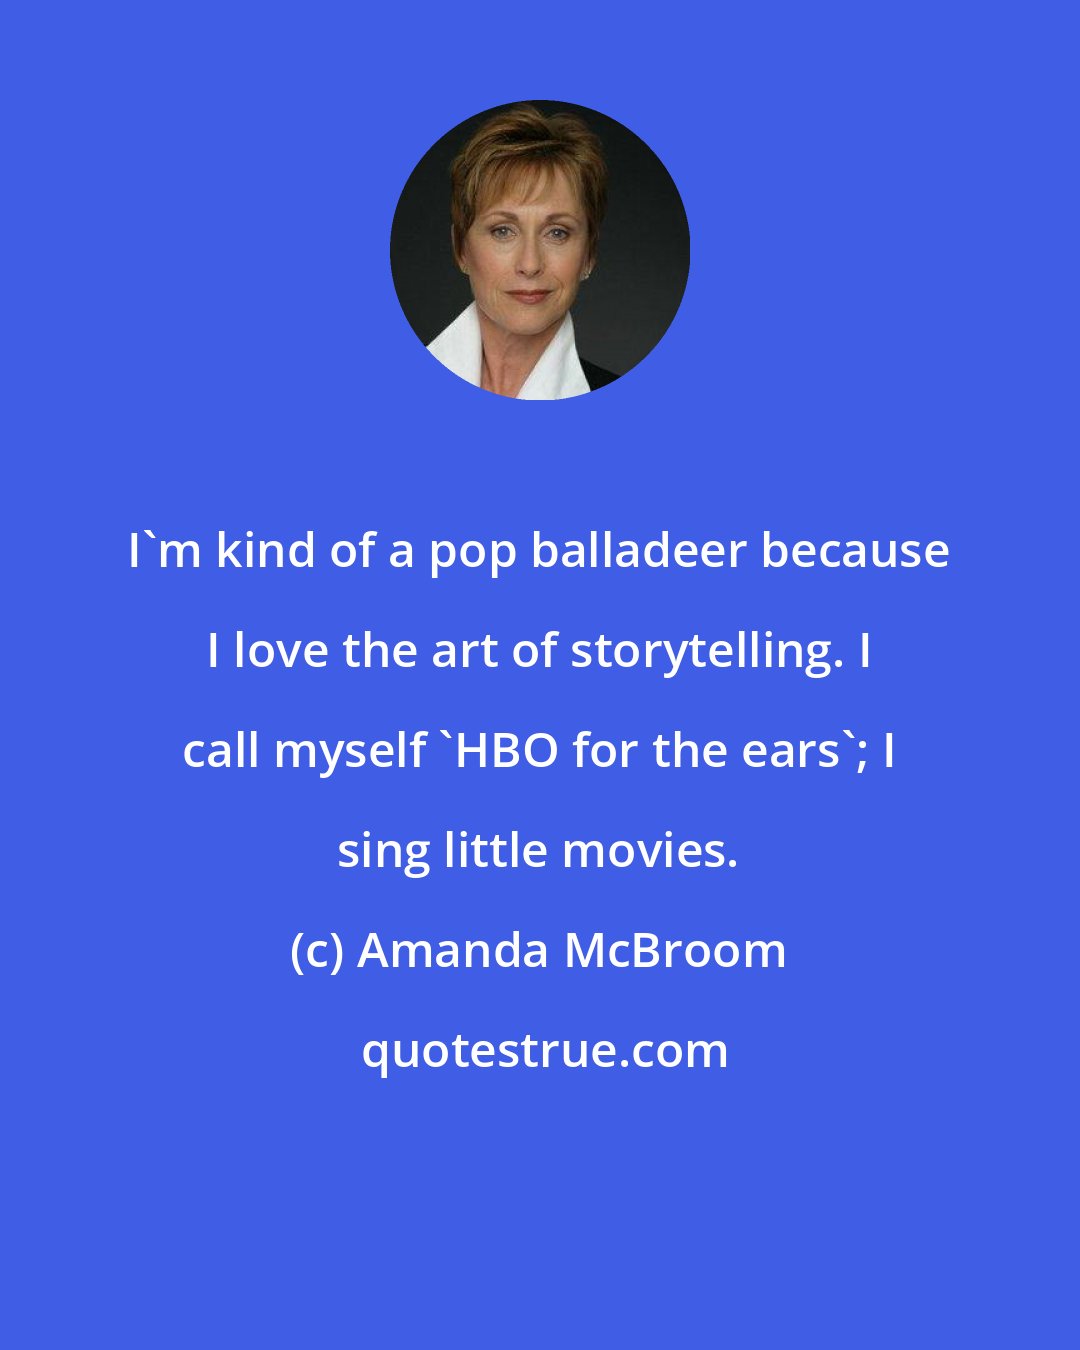 Amanda McBroom: I'm kind of a pop balladeer because I love the art of storytelling. I call myself 'HBO for the ears'; I sing little movies.